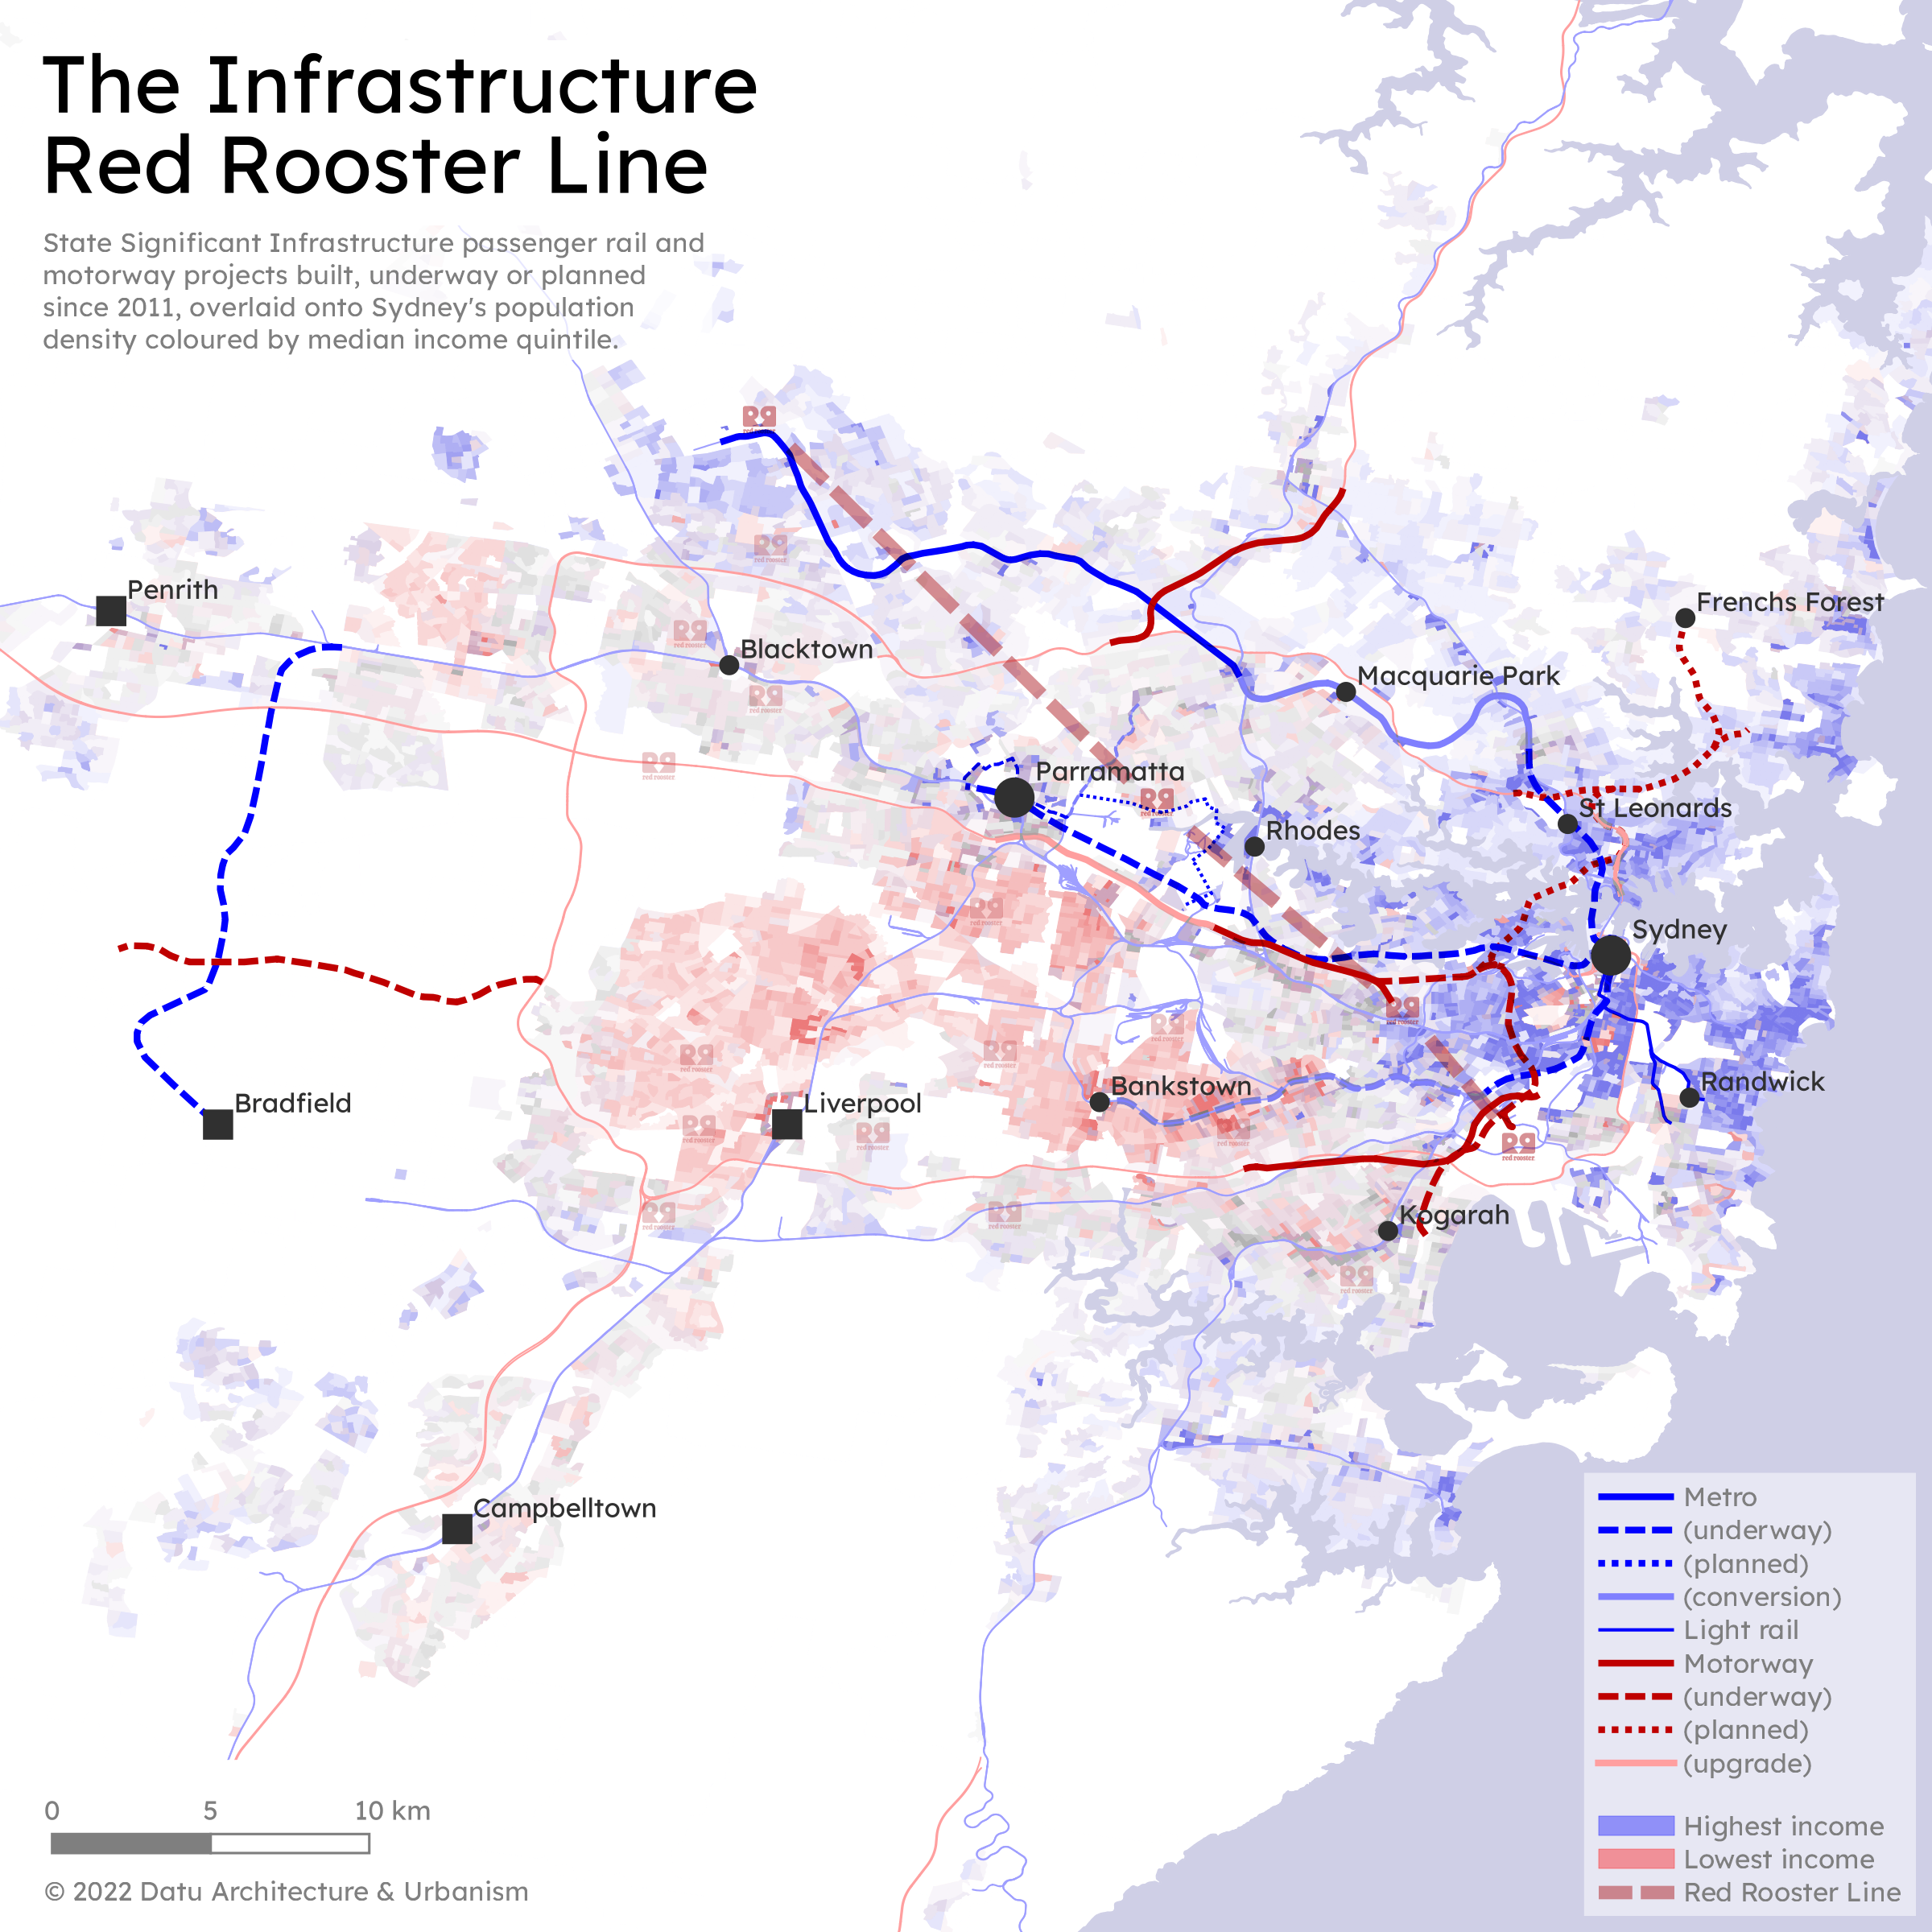 State Significant Infrastructure passenger rail and motorway projects built, underway or planned since 2011, overlaid onto Sydney's population density coloured by median income quintile.